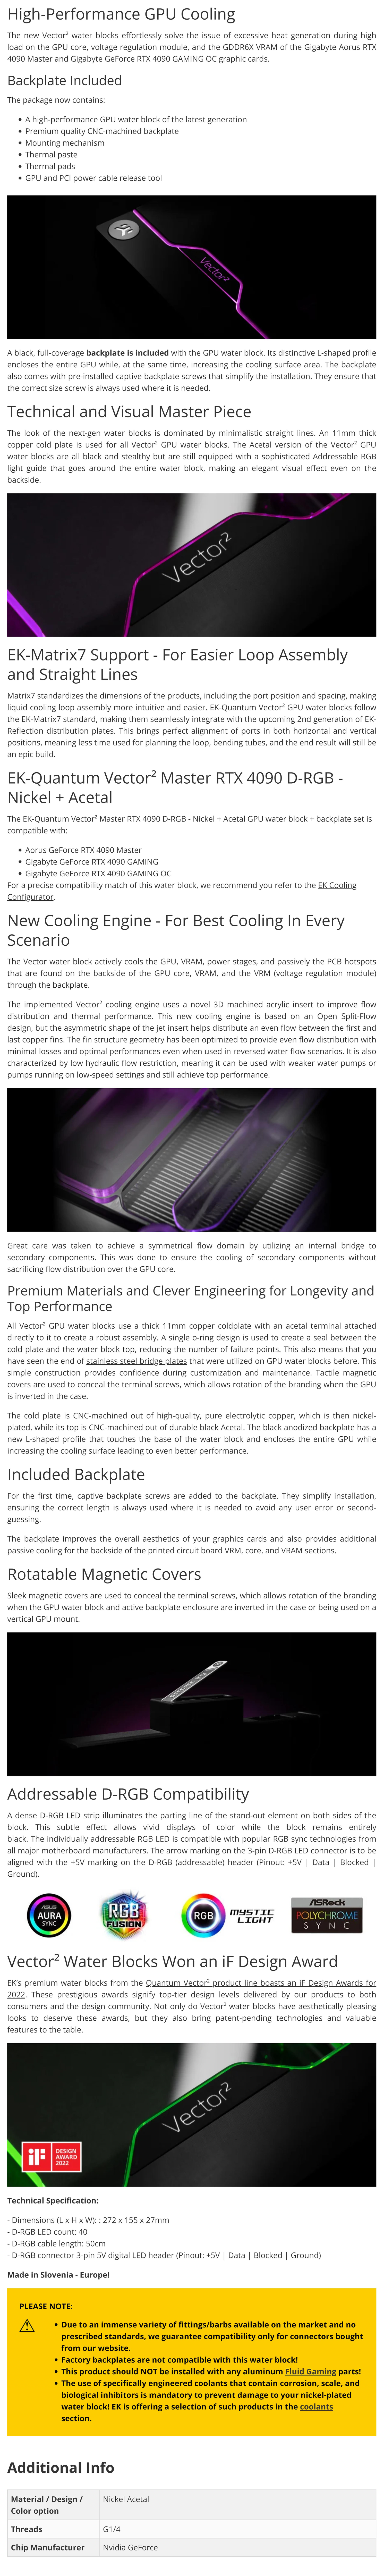 A large marketing image providing additional information about the product EK Quantum Vector2 Master RTX 4090 D-RGB GPU Waterblock - Nickel + Acetal - Additional alt info not provided